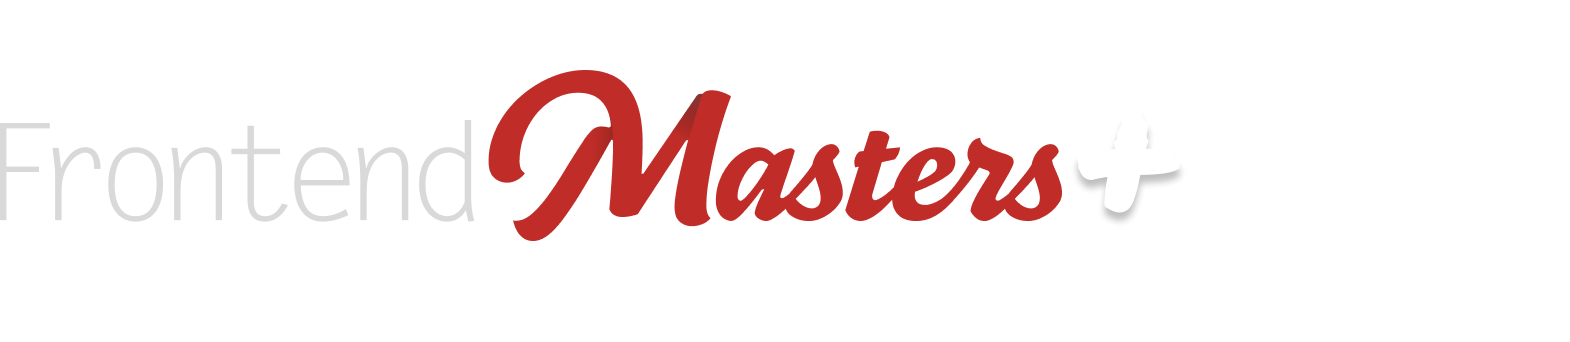 Frontend Masters logo